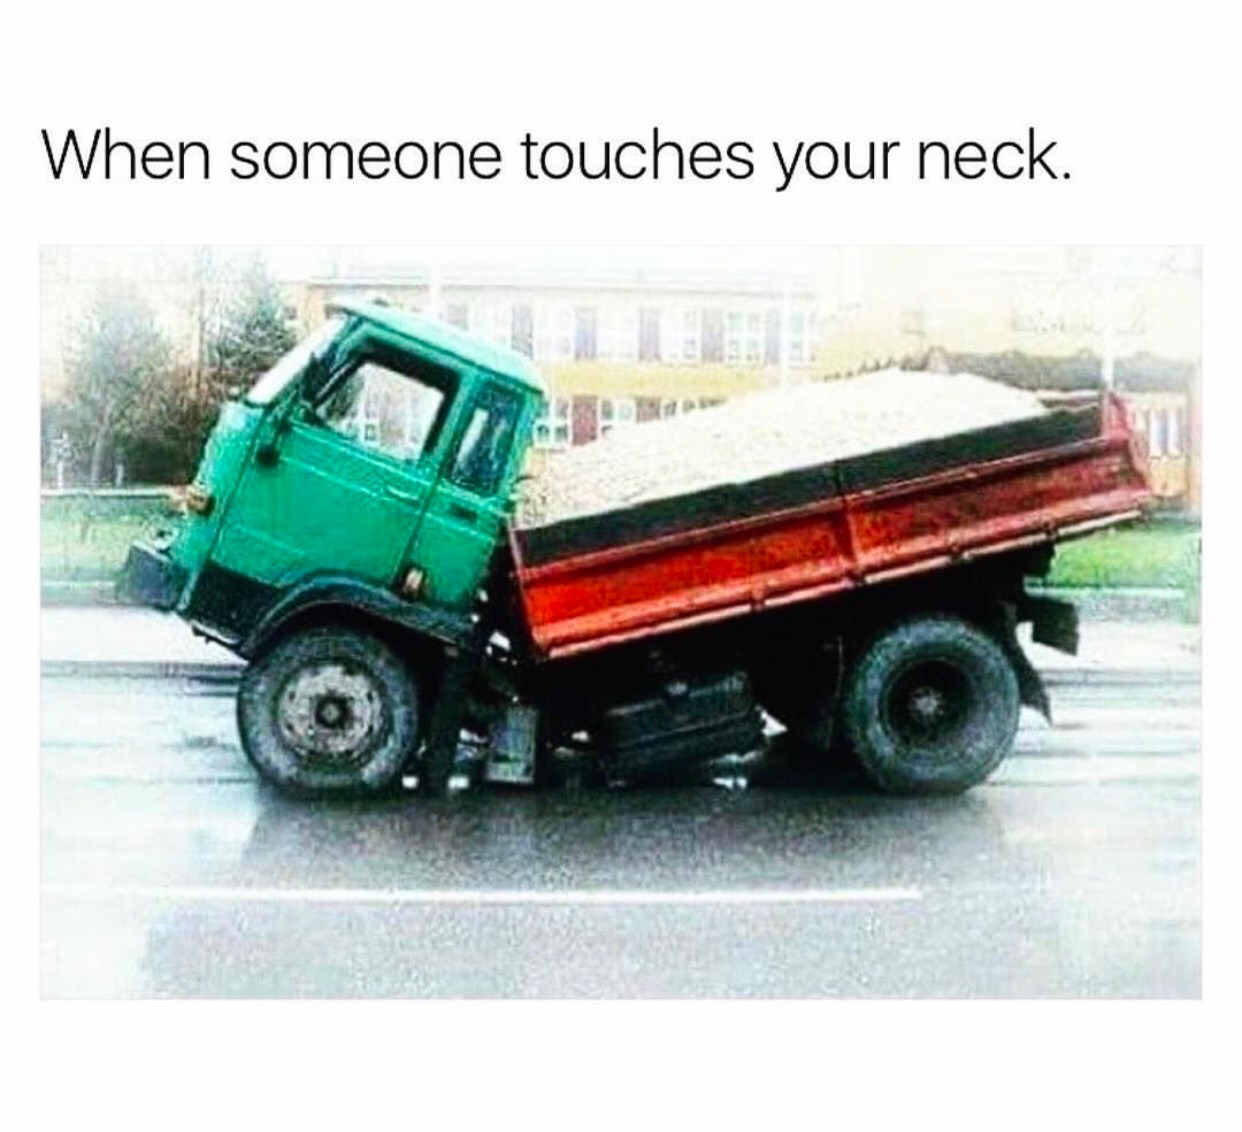 memes - neck touching memes - When someone touches your neck.